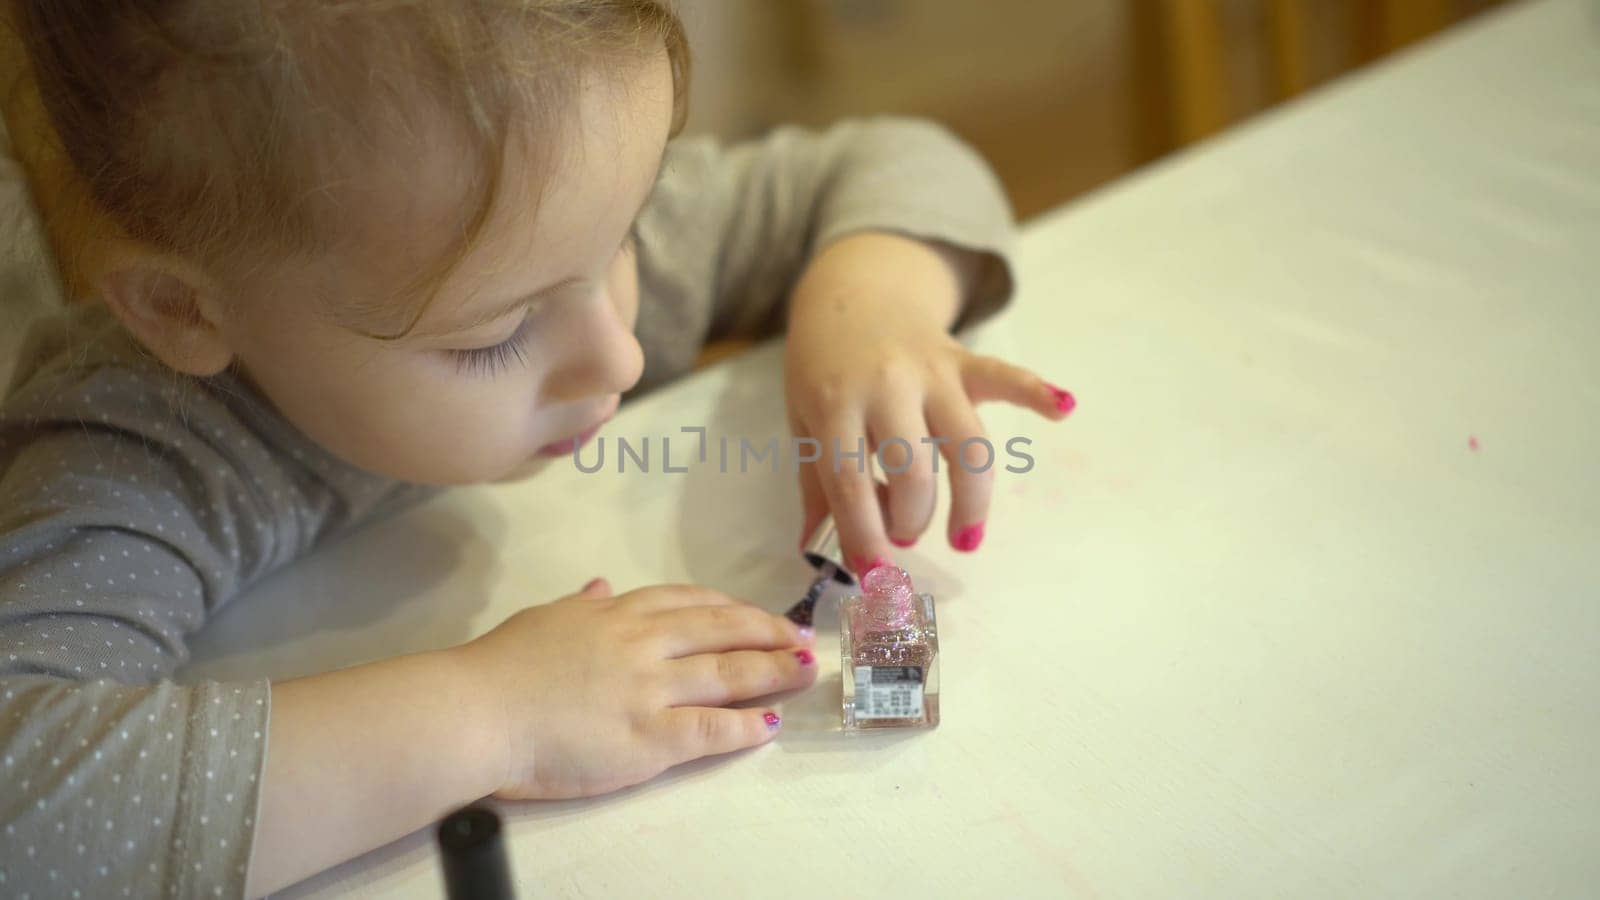 A little girl paints her nails with pink polish. The girl paints her nails like an adult. 4k